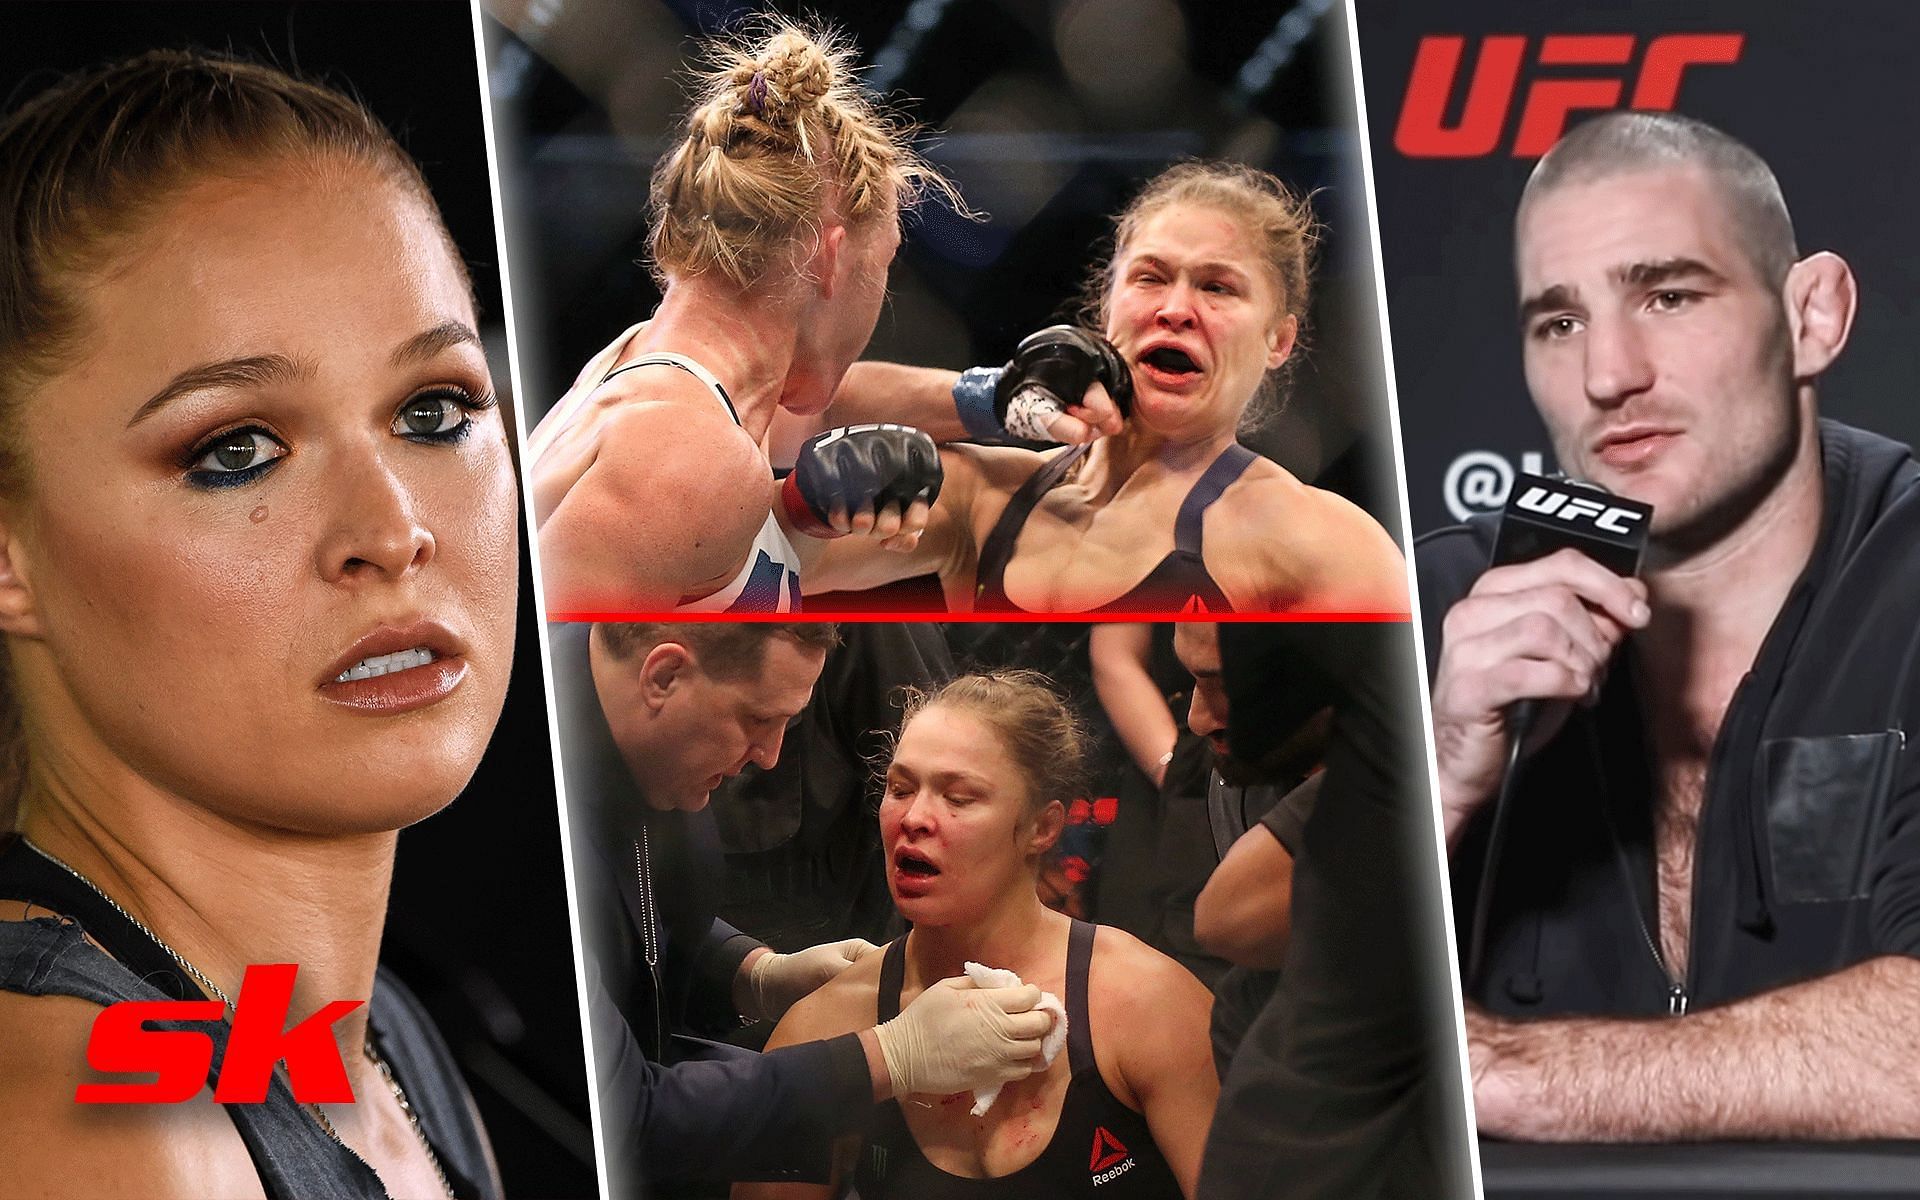 Ronda Rousey (Left), Ronda Rousey vs. Holly Holm (Middle), Sean Strickland (Right) [Image courtesy: Getty and @TheMacLife on YouTube]